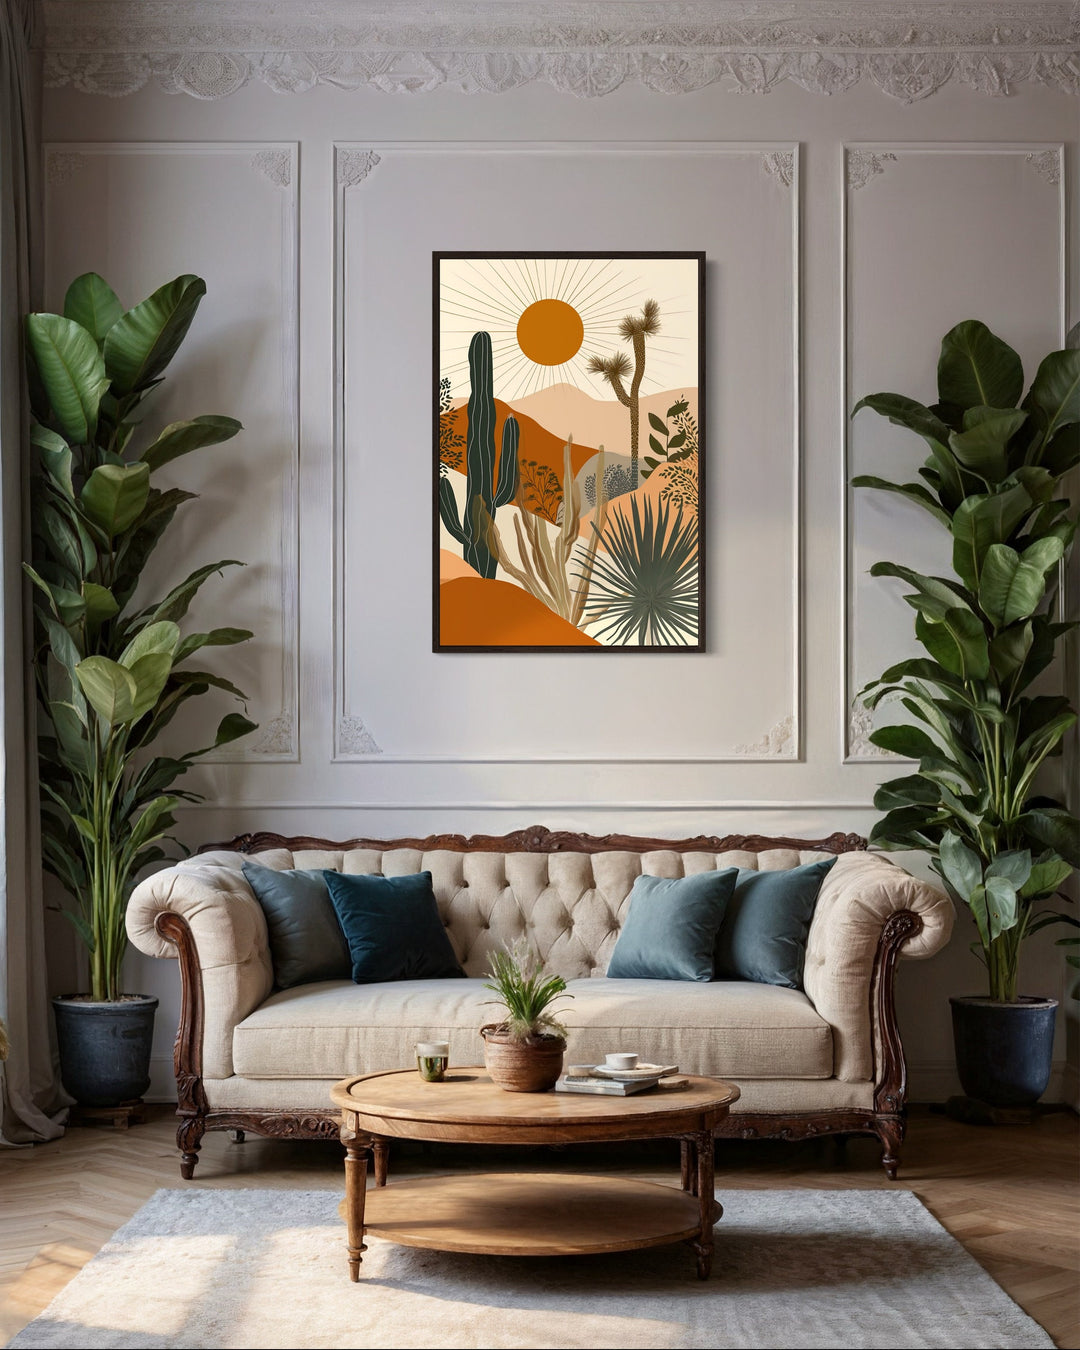 Boho Saguaro Cactus With Sun In The Desert Framed Canvas Wall Art in living room